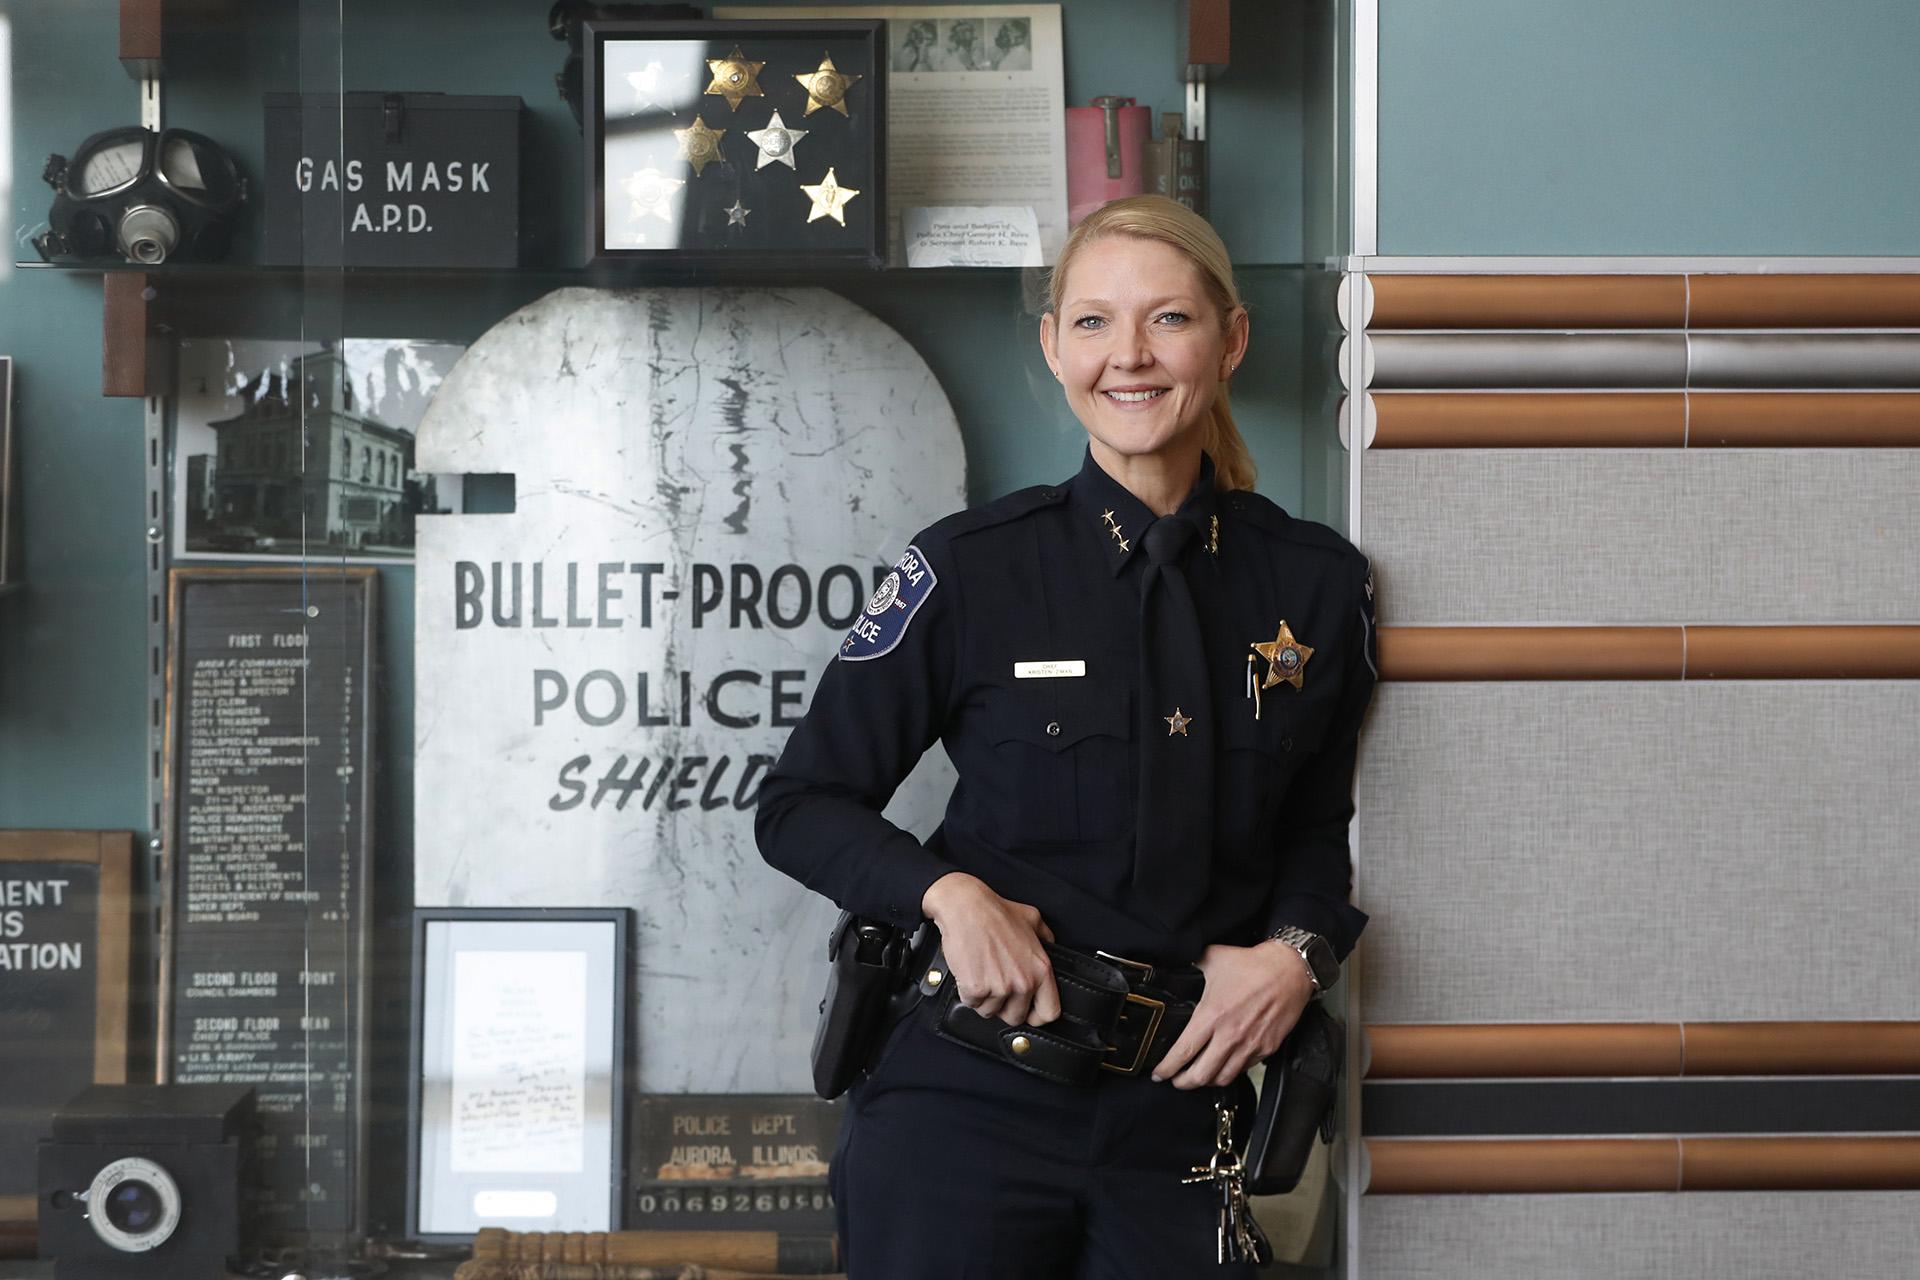 In this Monday, April 20, 2020, photo Aurora, Ill. police chief Kristen Ziman smiles as she poses for a portrait at police headquarters in Aurora. Across the country first responders who've fallen ill and recovered, like Chief Ziman, have begun the harrowing experience of returning to jobs that put them back on the front lines of America’s fight against the novel coronavirus. (AP Photo / Charles Rex Arbogast)